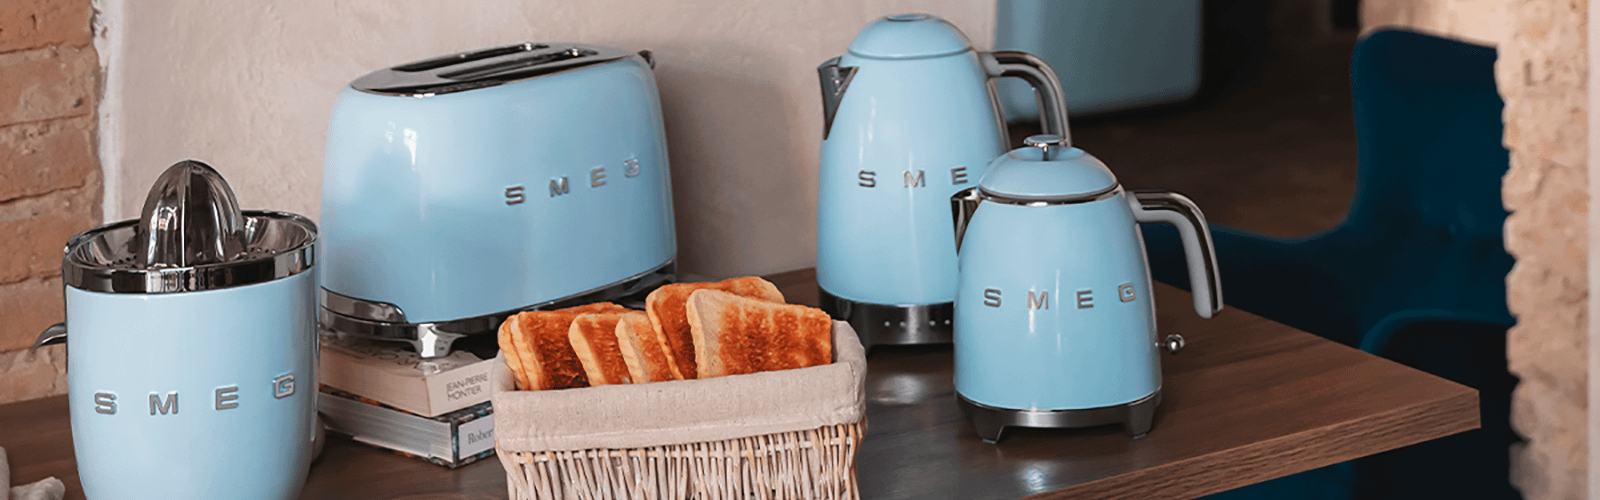 Smeg blue appliances including two kettles, a toaster and a juicer. A basket of toast is in front.